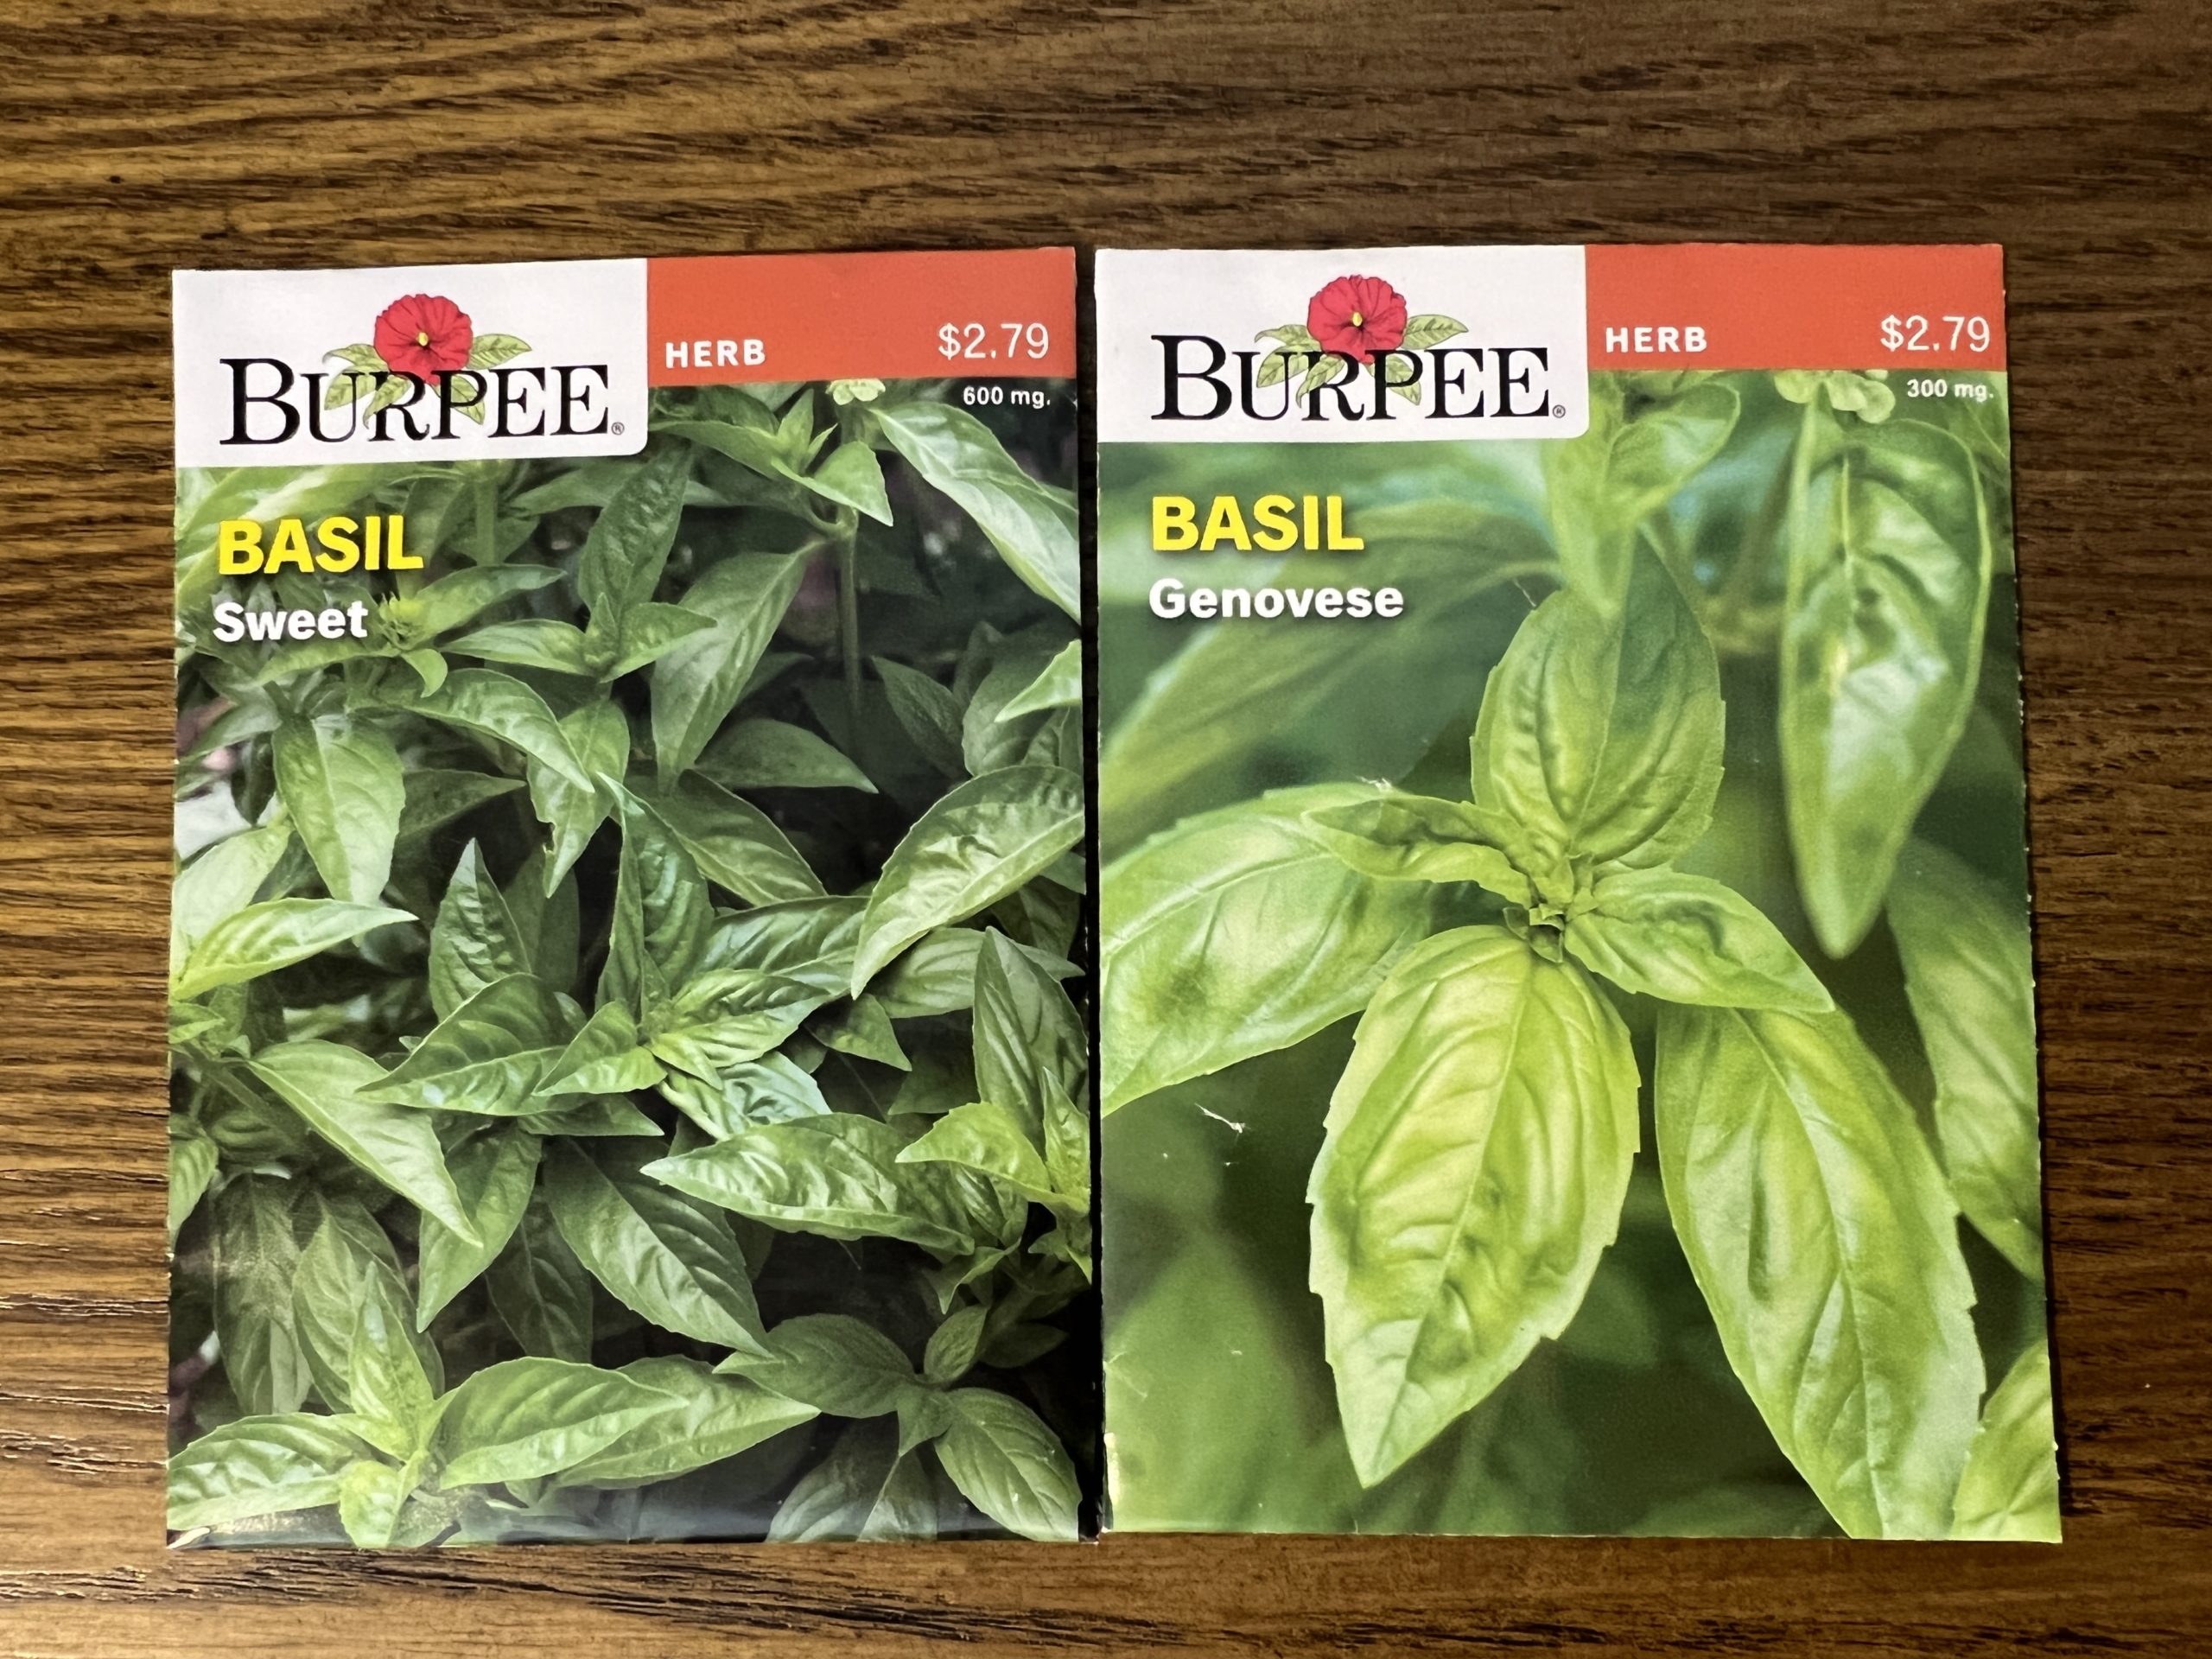 There’s enough seed in each packet for hundreds of basil plants and, if properly stored, will last four to five years.